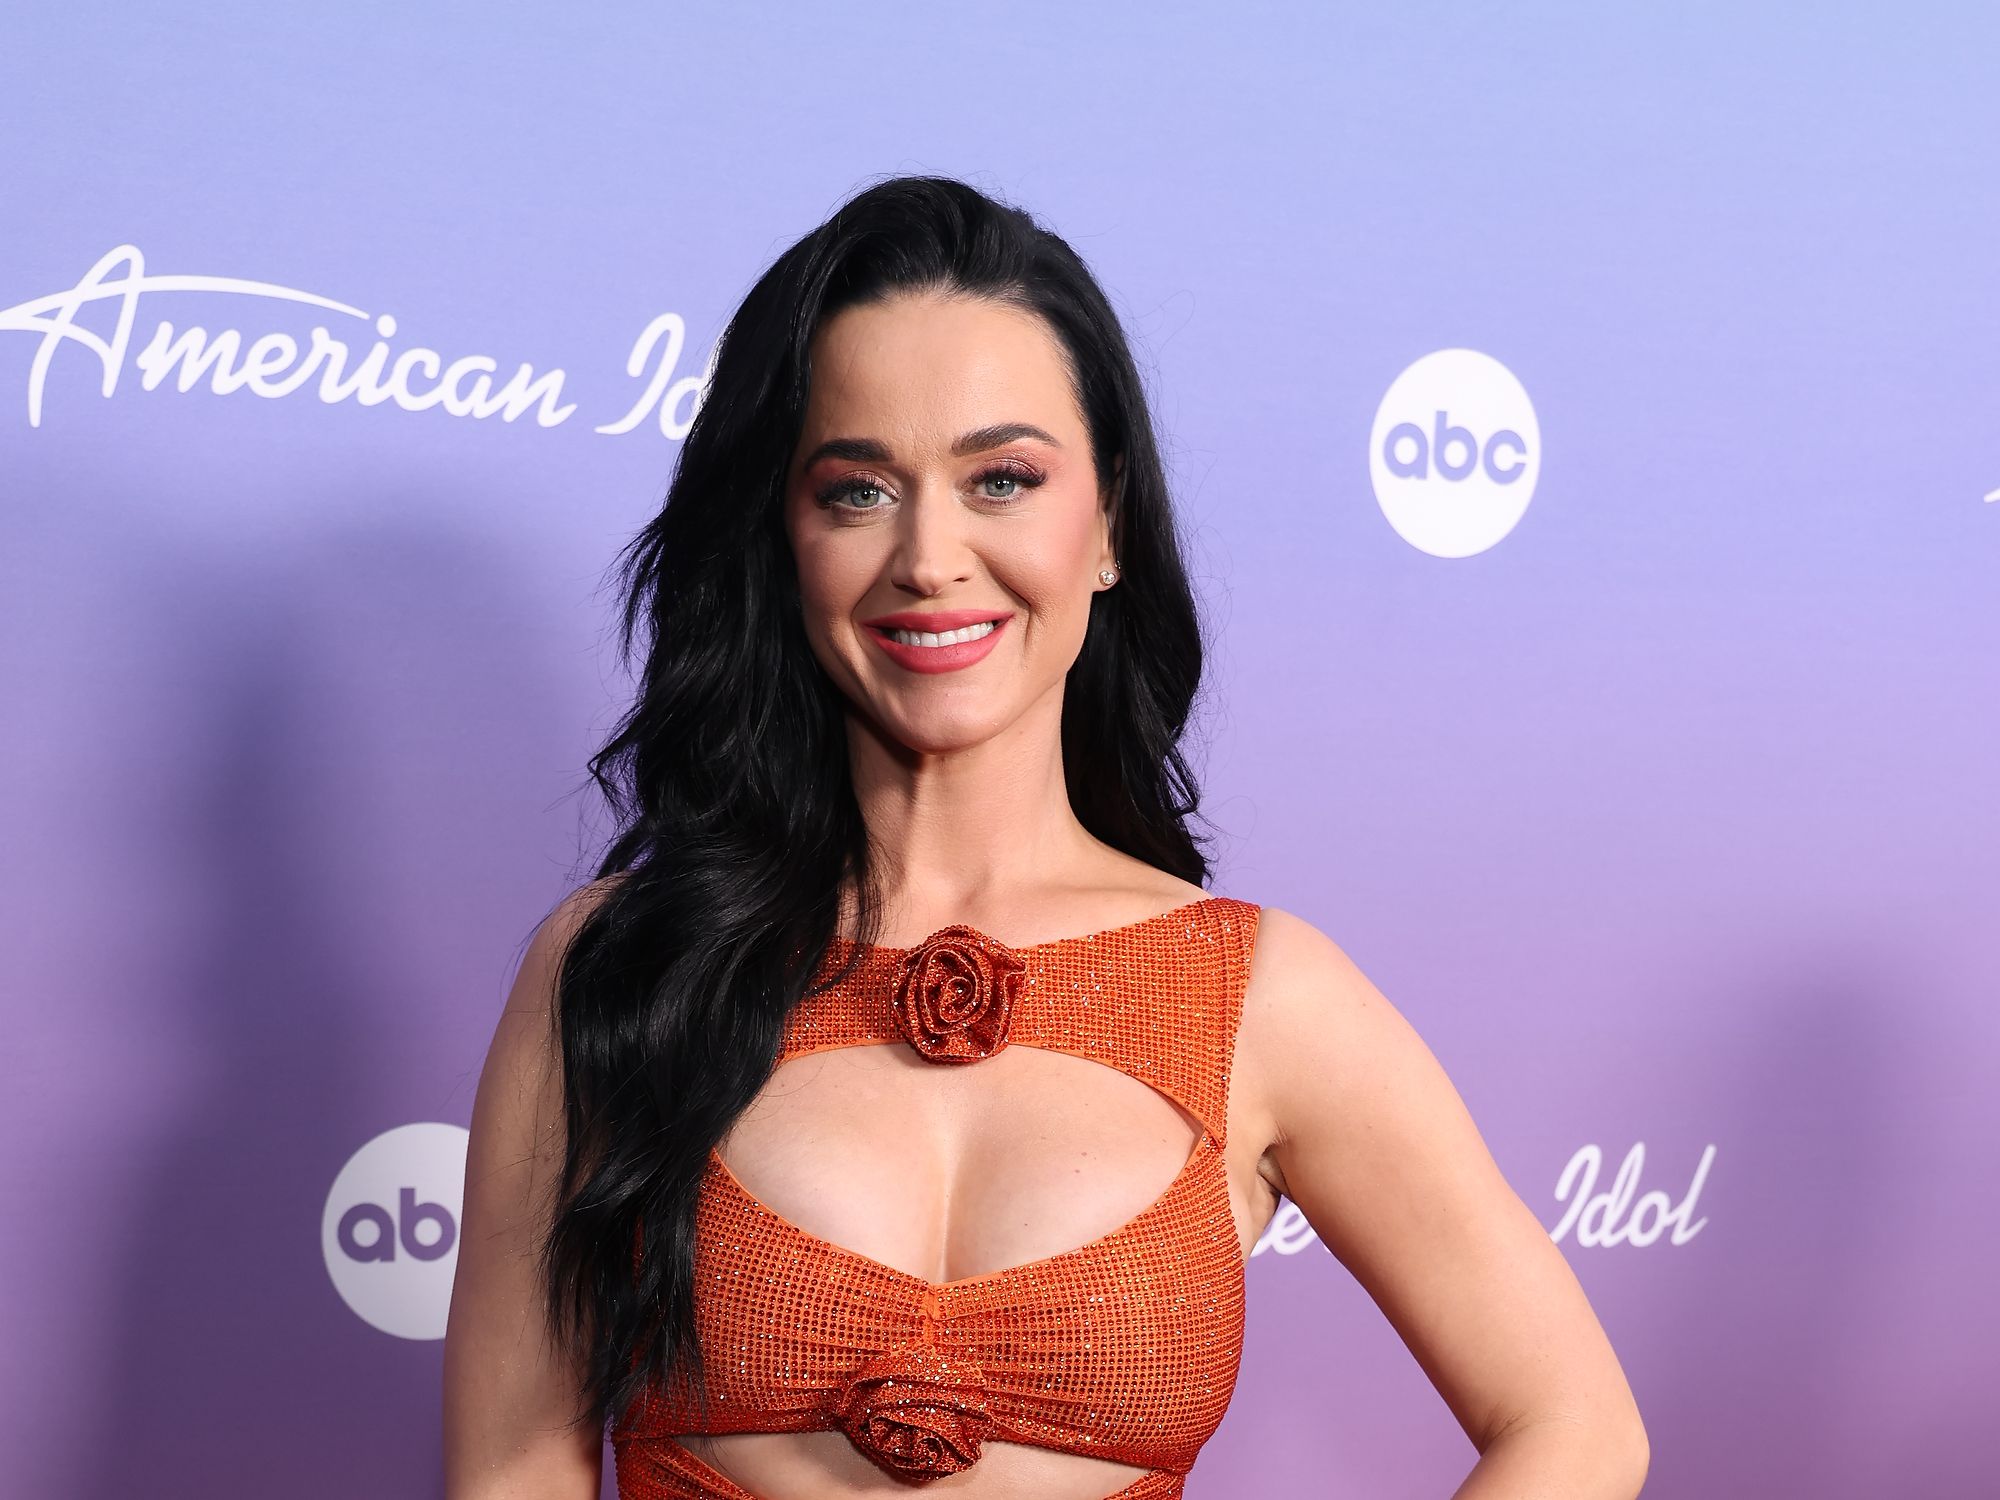 anne louise smith add photo katy perry super hot